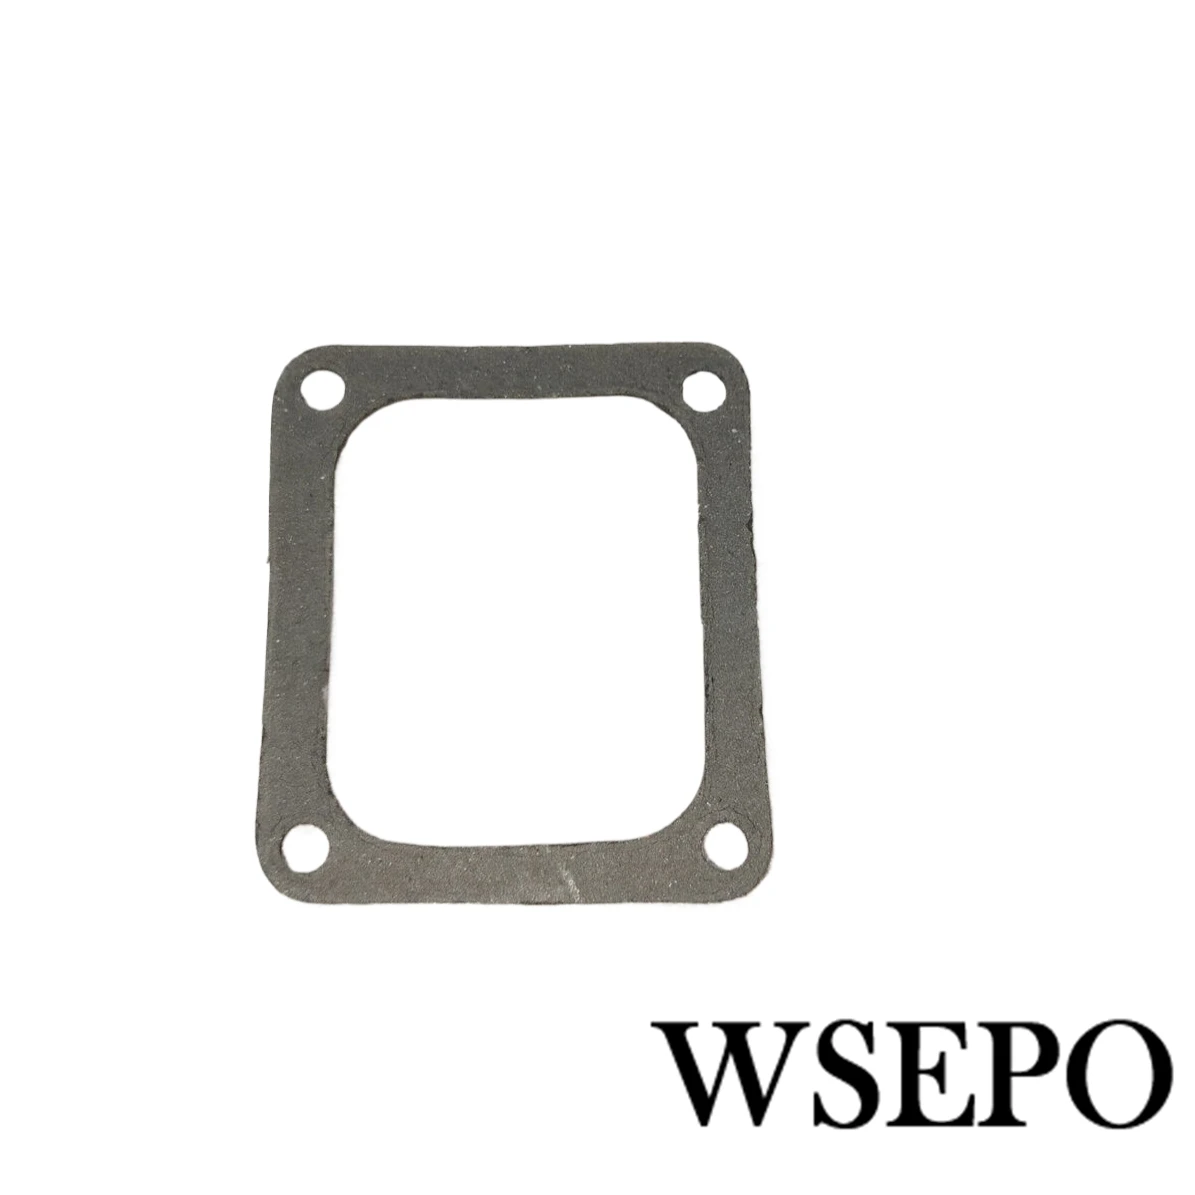 Top Quality! Water Tank Upper Gasket for R165 R170 3HP 4HP 4 Stroke Small Water Cooled Diesel Engine